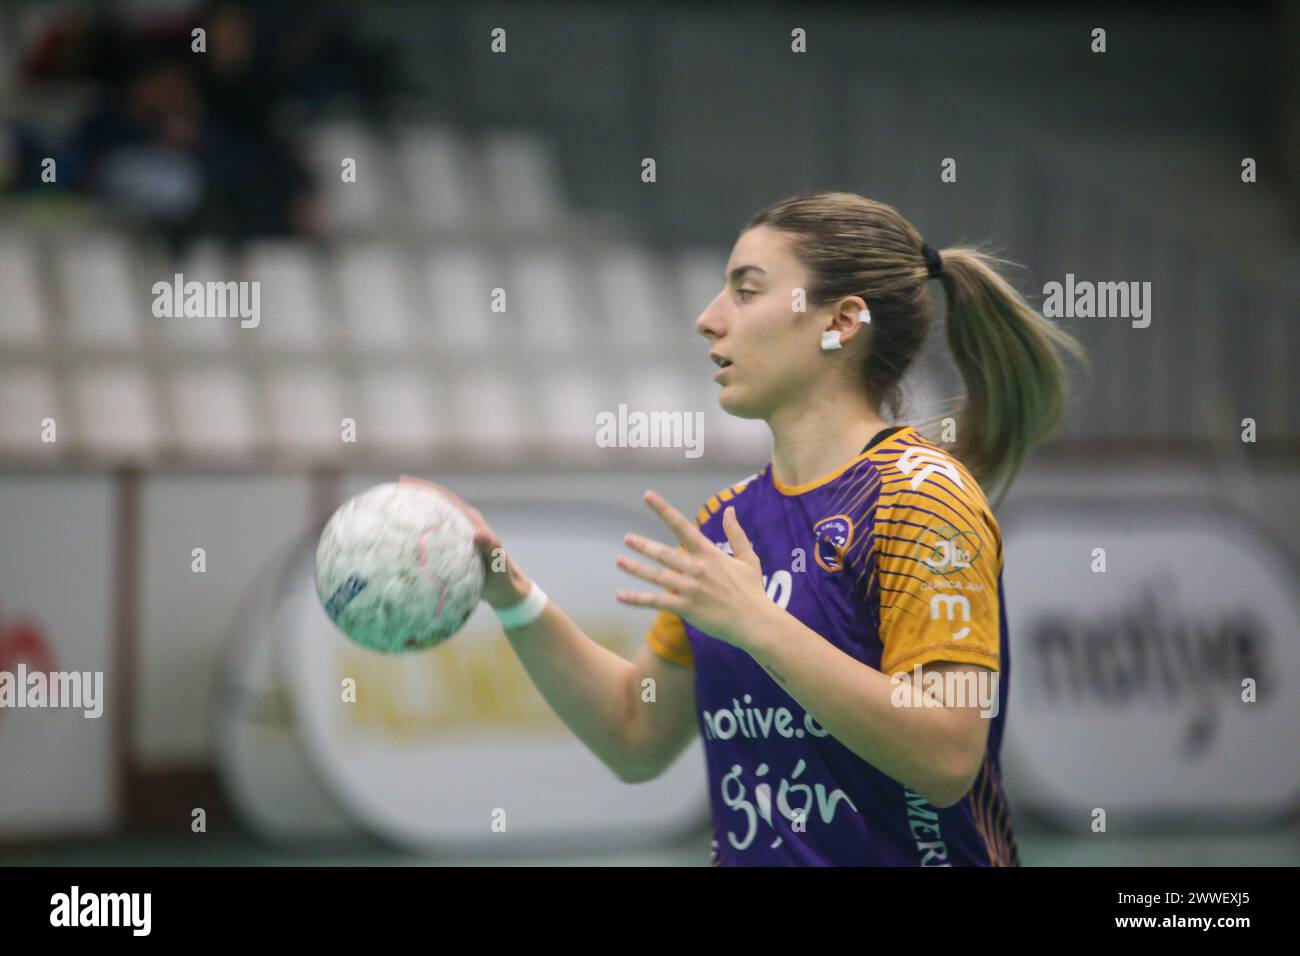 Gijón, Spain, 23th March, 2024: The player of Motive.co Gijón Balonmano La Calzada, Marta da Silva (19) with the ball during the 22nd Matchday of the Liga Guerreras Iberdrola 2023-24 between Motive.co Gijón Balonmano La Calzada and the KH-7 BM. Granollers, on March 23, 2024, at the La Arena Pavilion, in Gijón, Spain. Credit: Alberto Brevers / Alamy Live News. Stock Photo